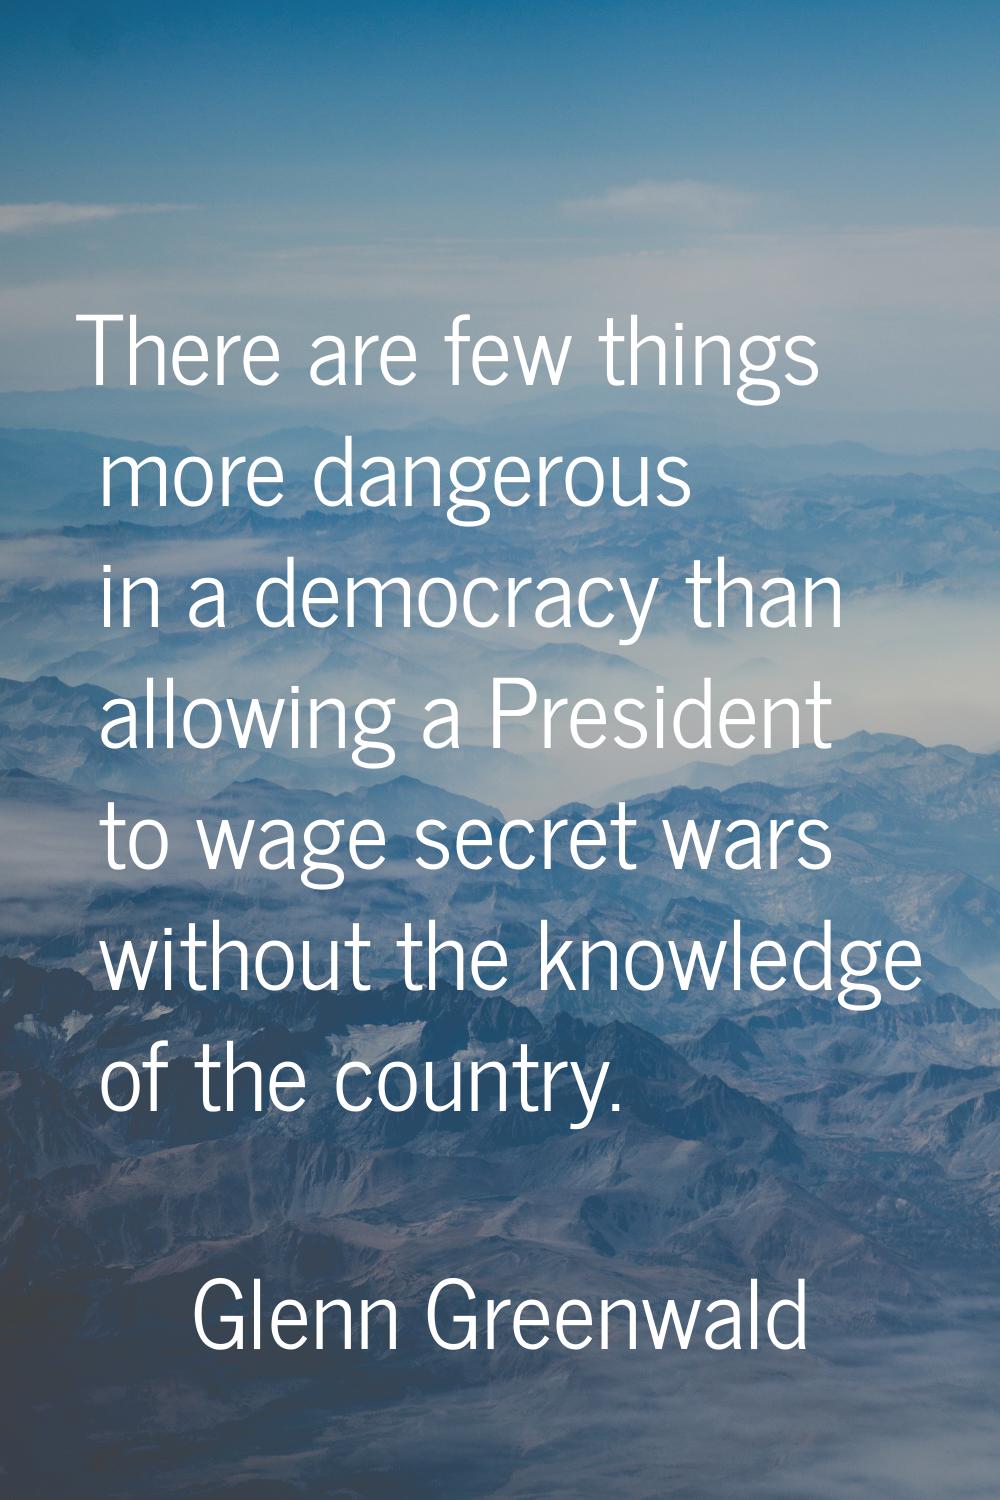 There are few things more dangerous in a democracy than allowing a President to wage secret wars wi